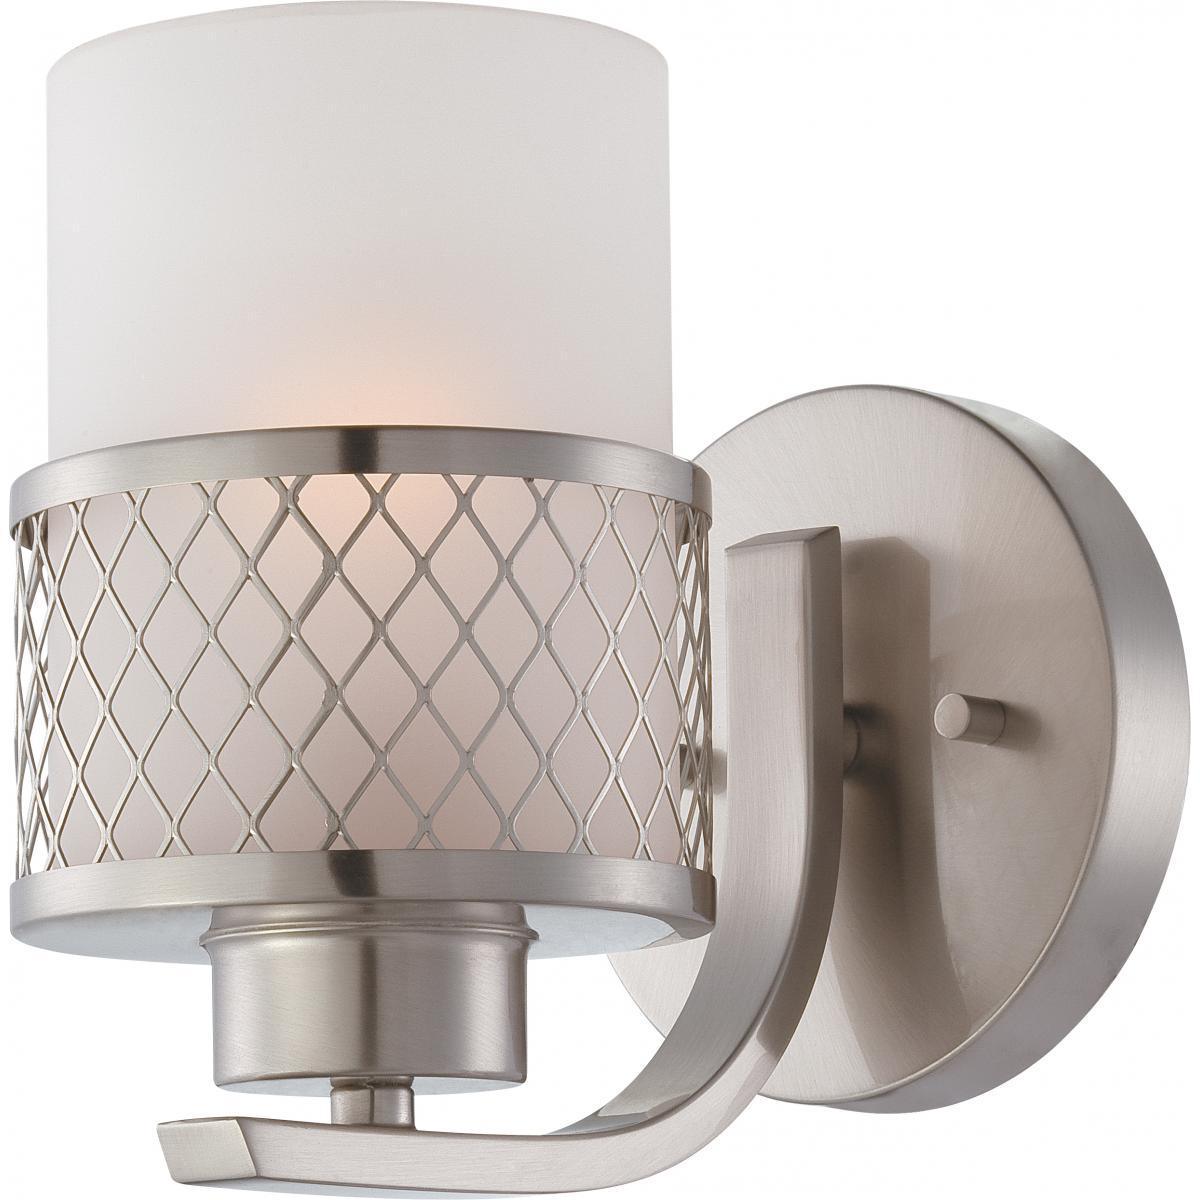 Fusion 7 In. Armed Sconce Nickel Finish